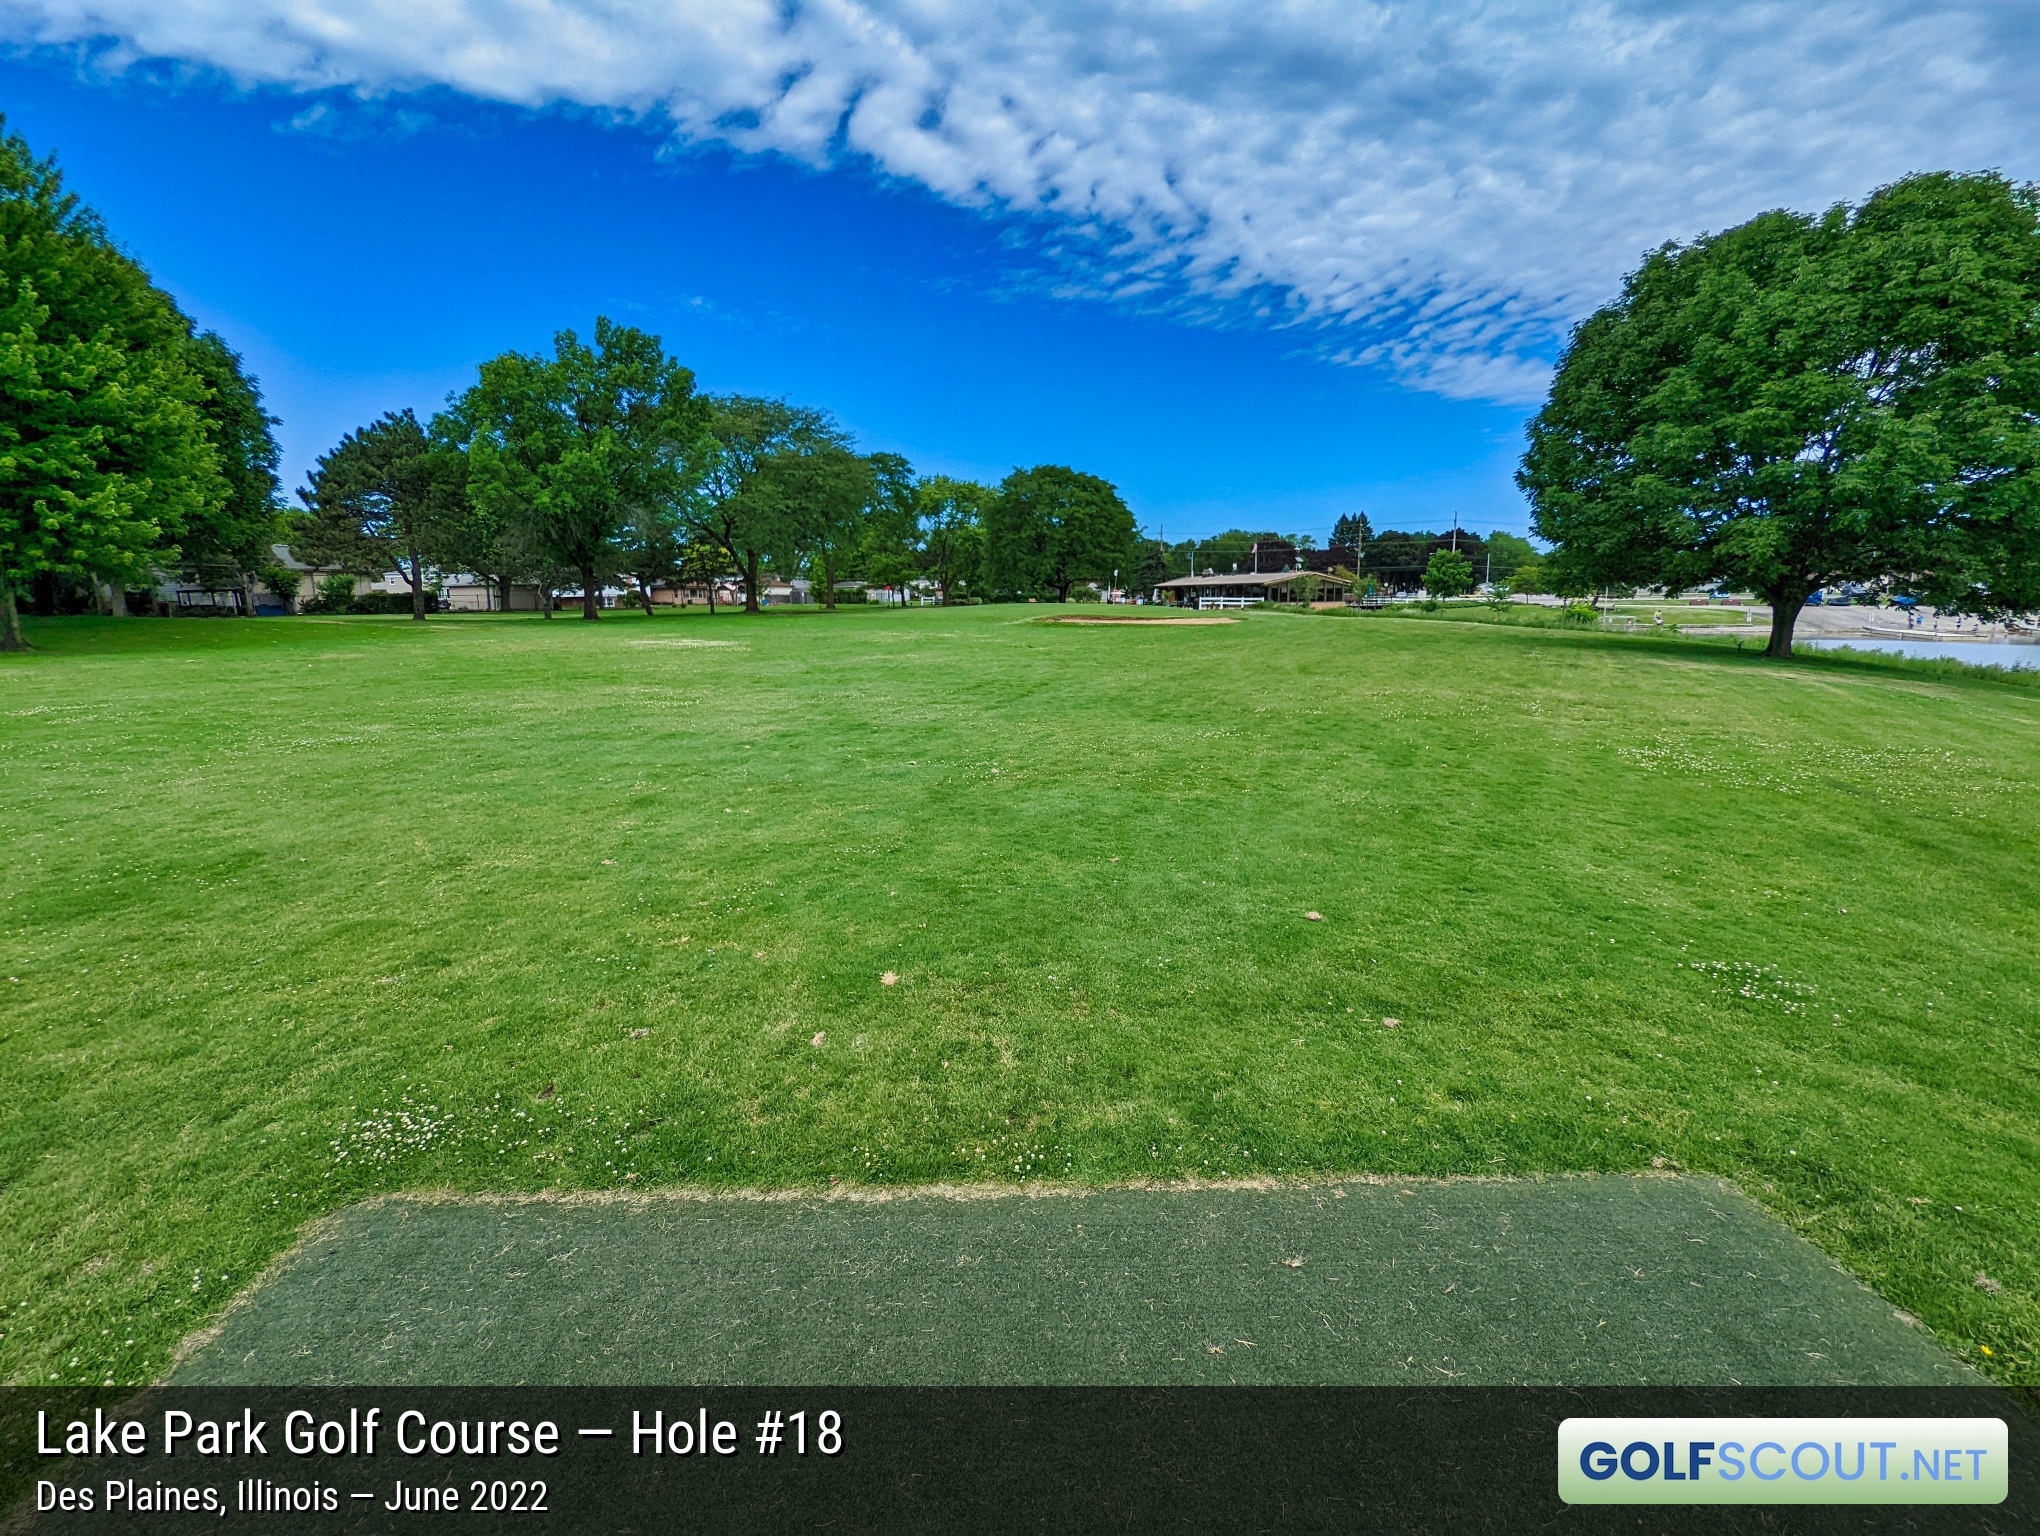 Photo of hole #18 at Lake Park Golf Course in Des Plaines, Illinois. 